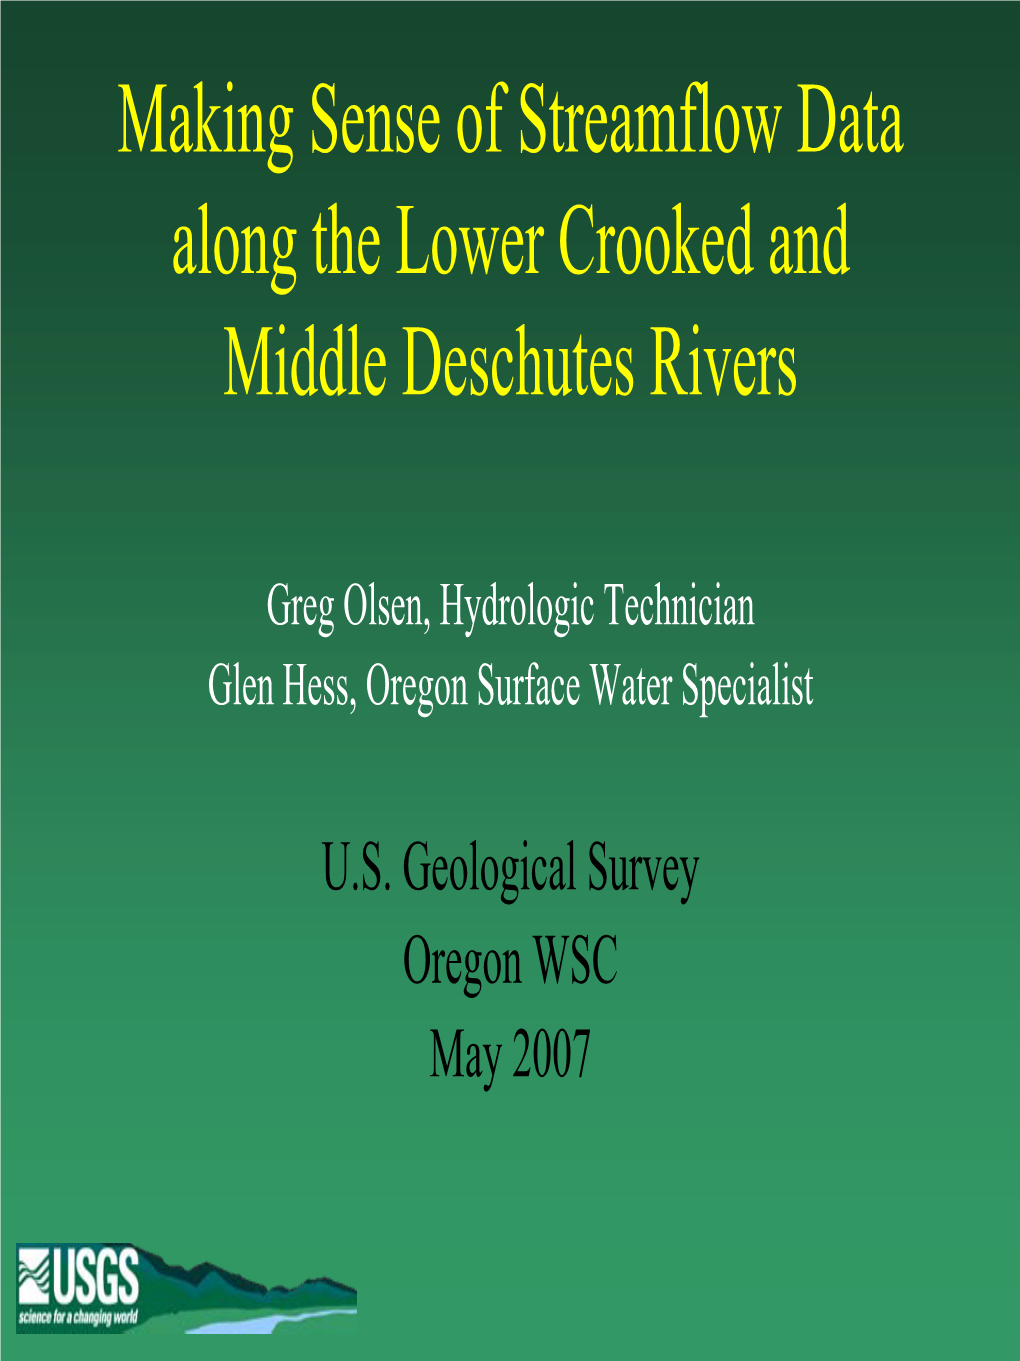 Making Sense of Streamflow Data Along the Lower Crooked and Middle Deschutes Rivers